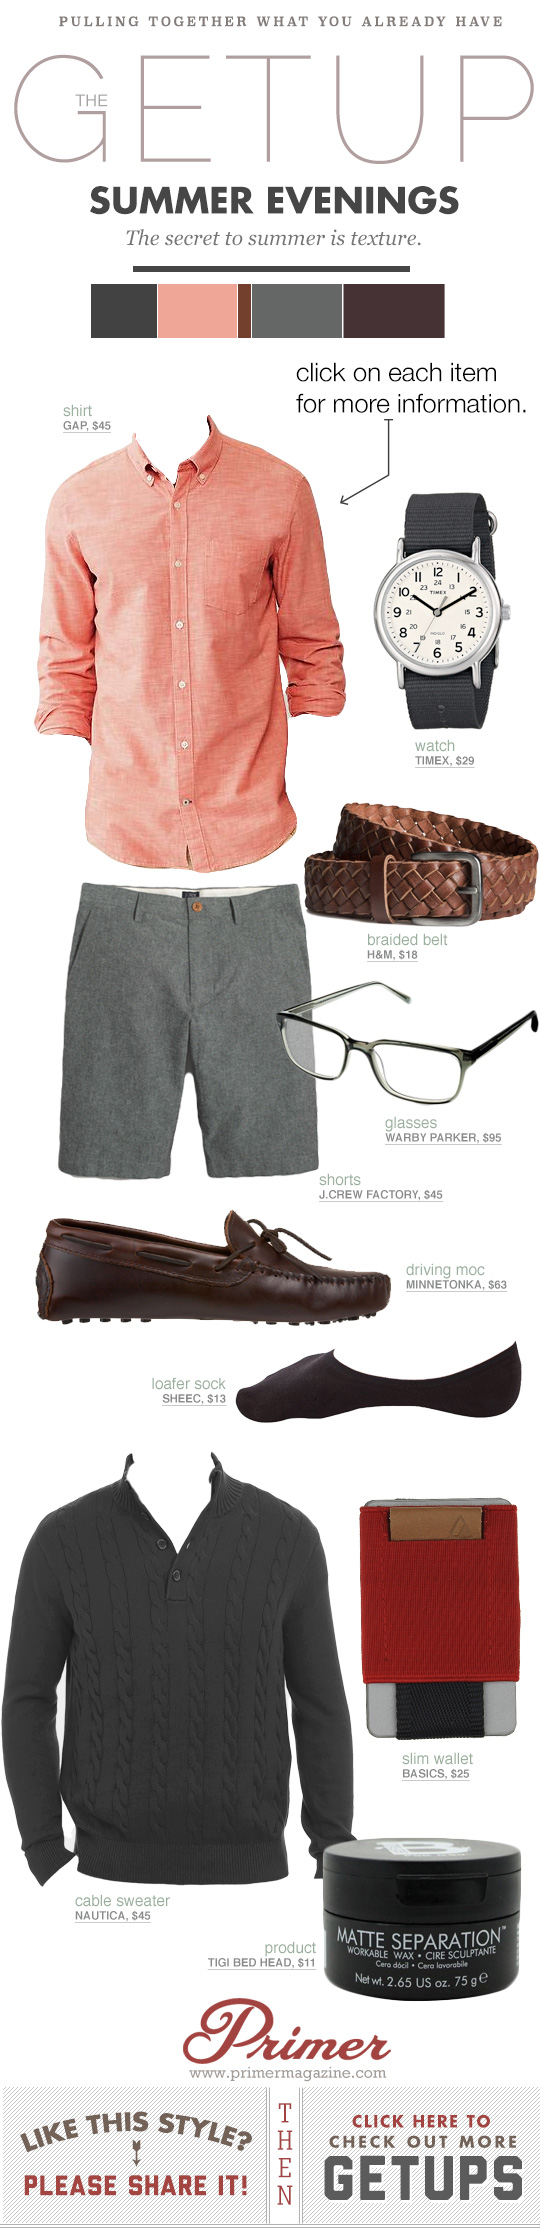 Getup Summer Evenings - Salmon shirt, gray shorts, brown leather loafers with glasses